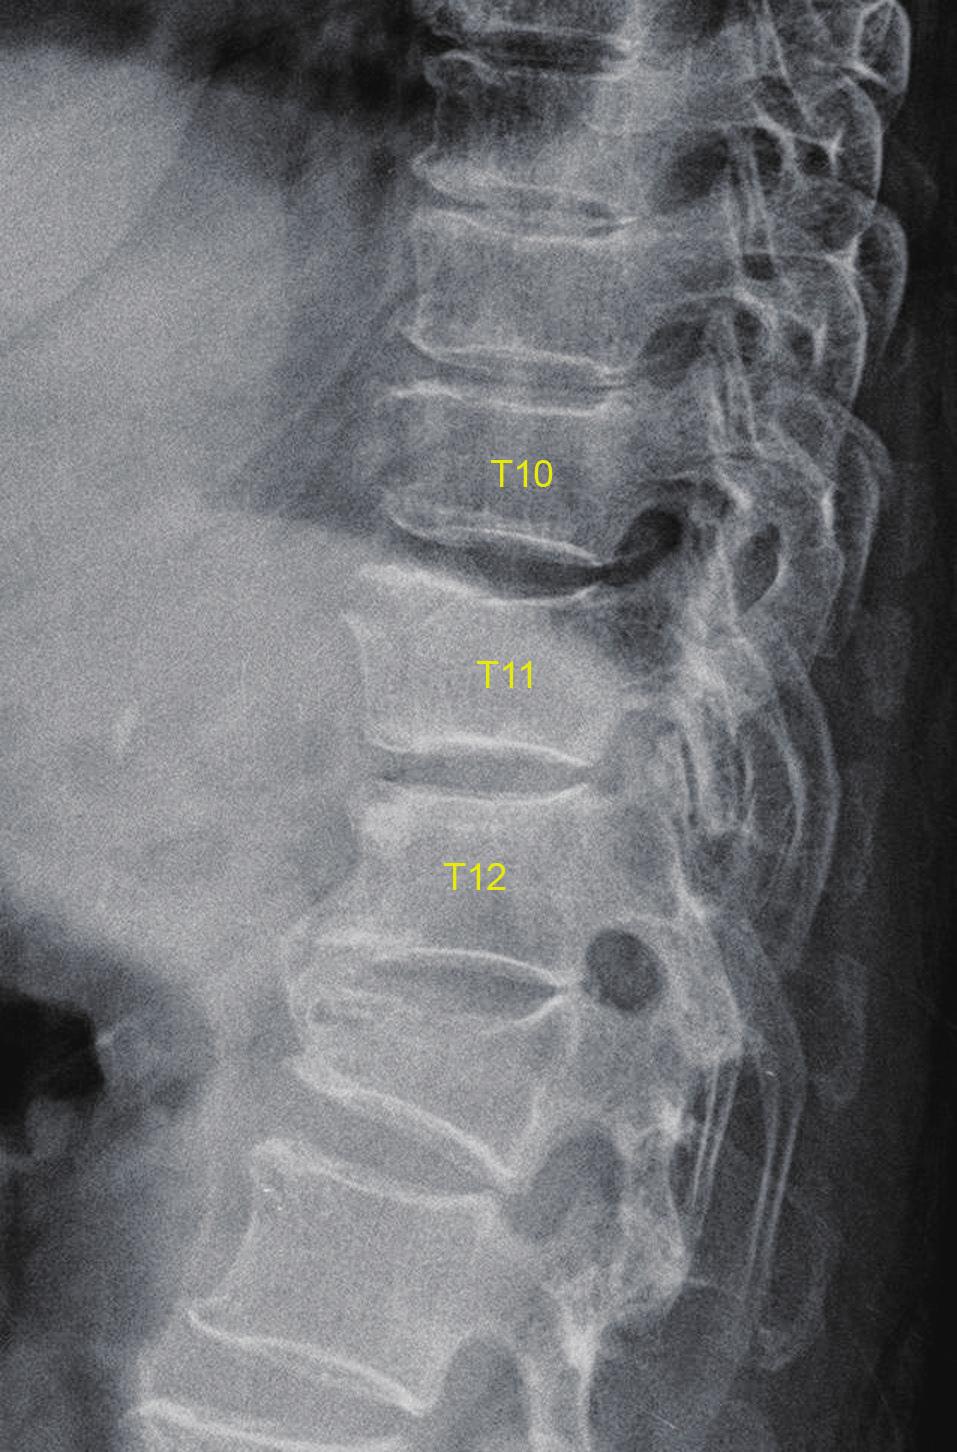 The fracture was not more displaced compared to previous imaging, but the intervertebral disc of T10 to T11 space was extruded with superior migration, compressing the spinal cord with compressive